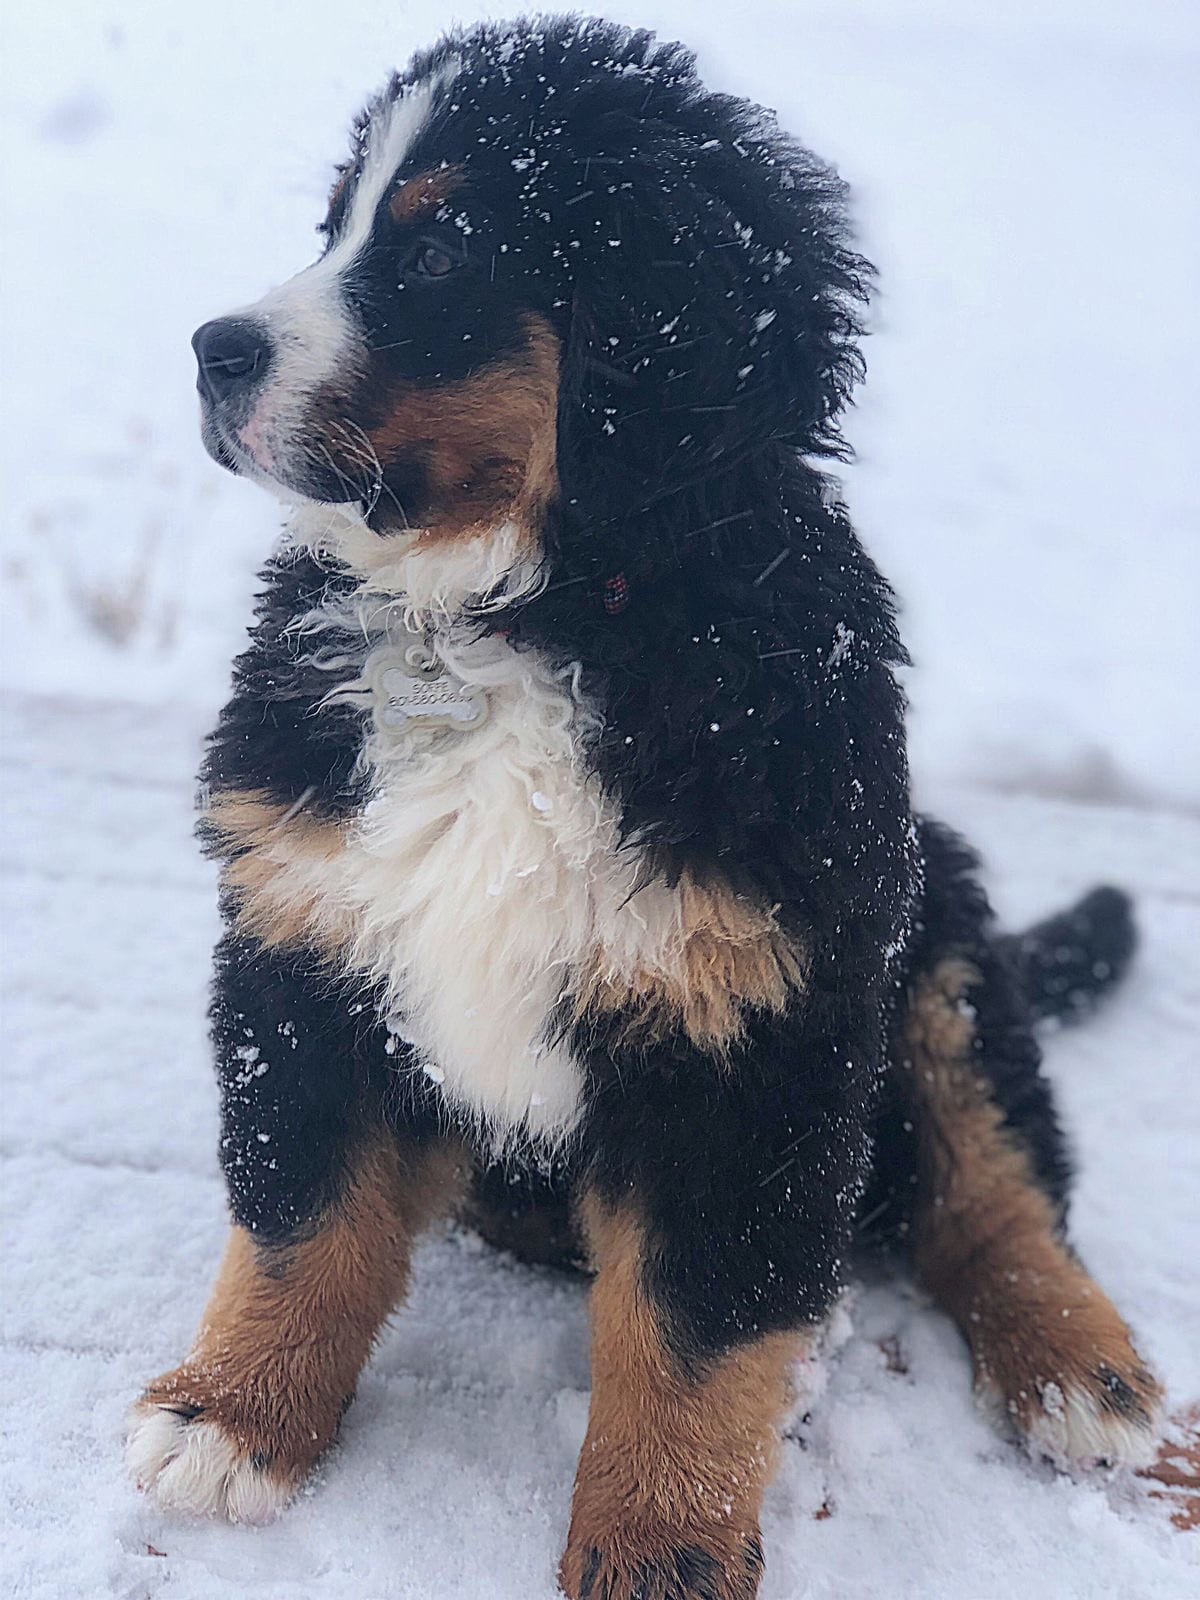 A Bernese Mountain Dog sitting in snow outdoors during winter